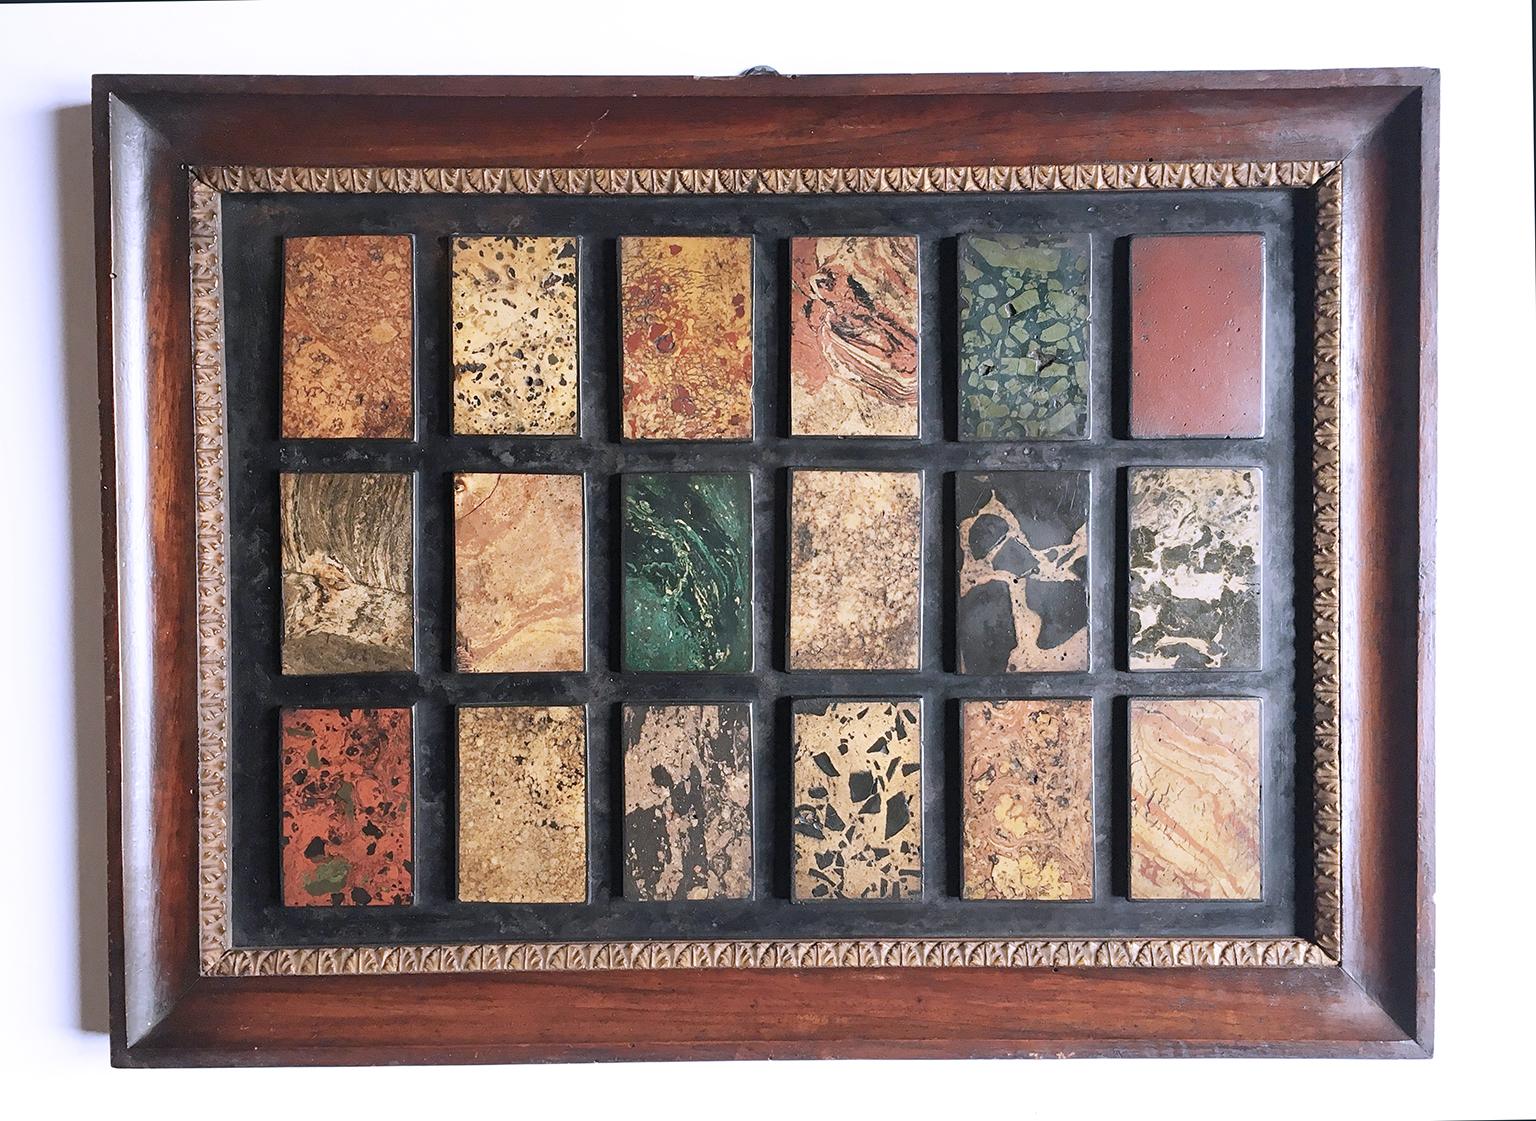 Assortment of 72 varieties of marble made in scagliola and applied to slate
Northern Italy, late 19th century
Each slab dimensions 30.5 cm (12 in) x 42.5 cm (16.73 in)
Each frame dimensions 37.5 cm (14.76 in) x 50 cm (19.68 in)
State of